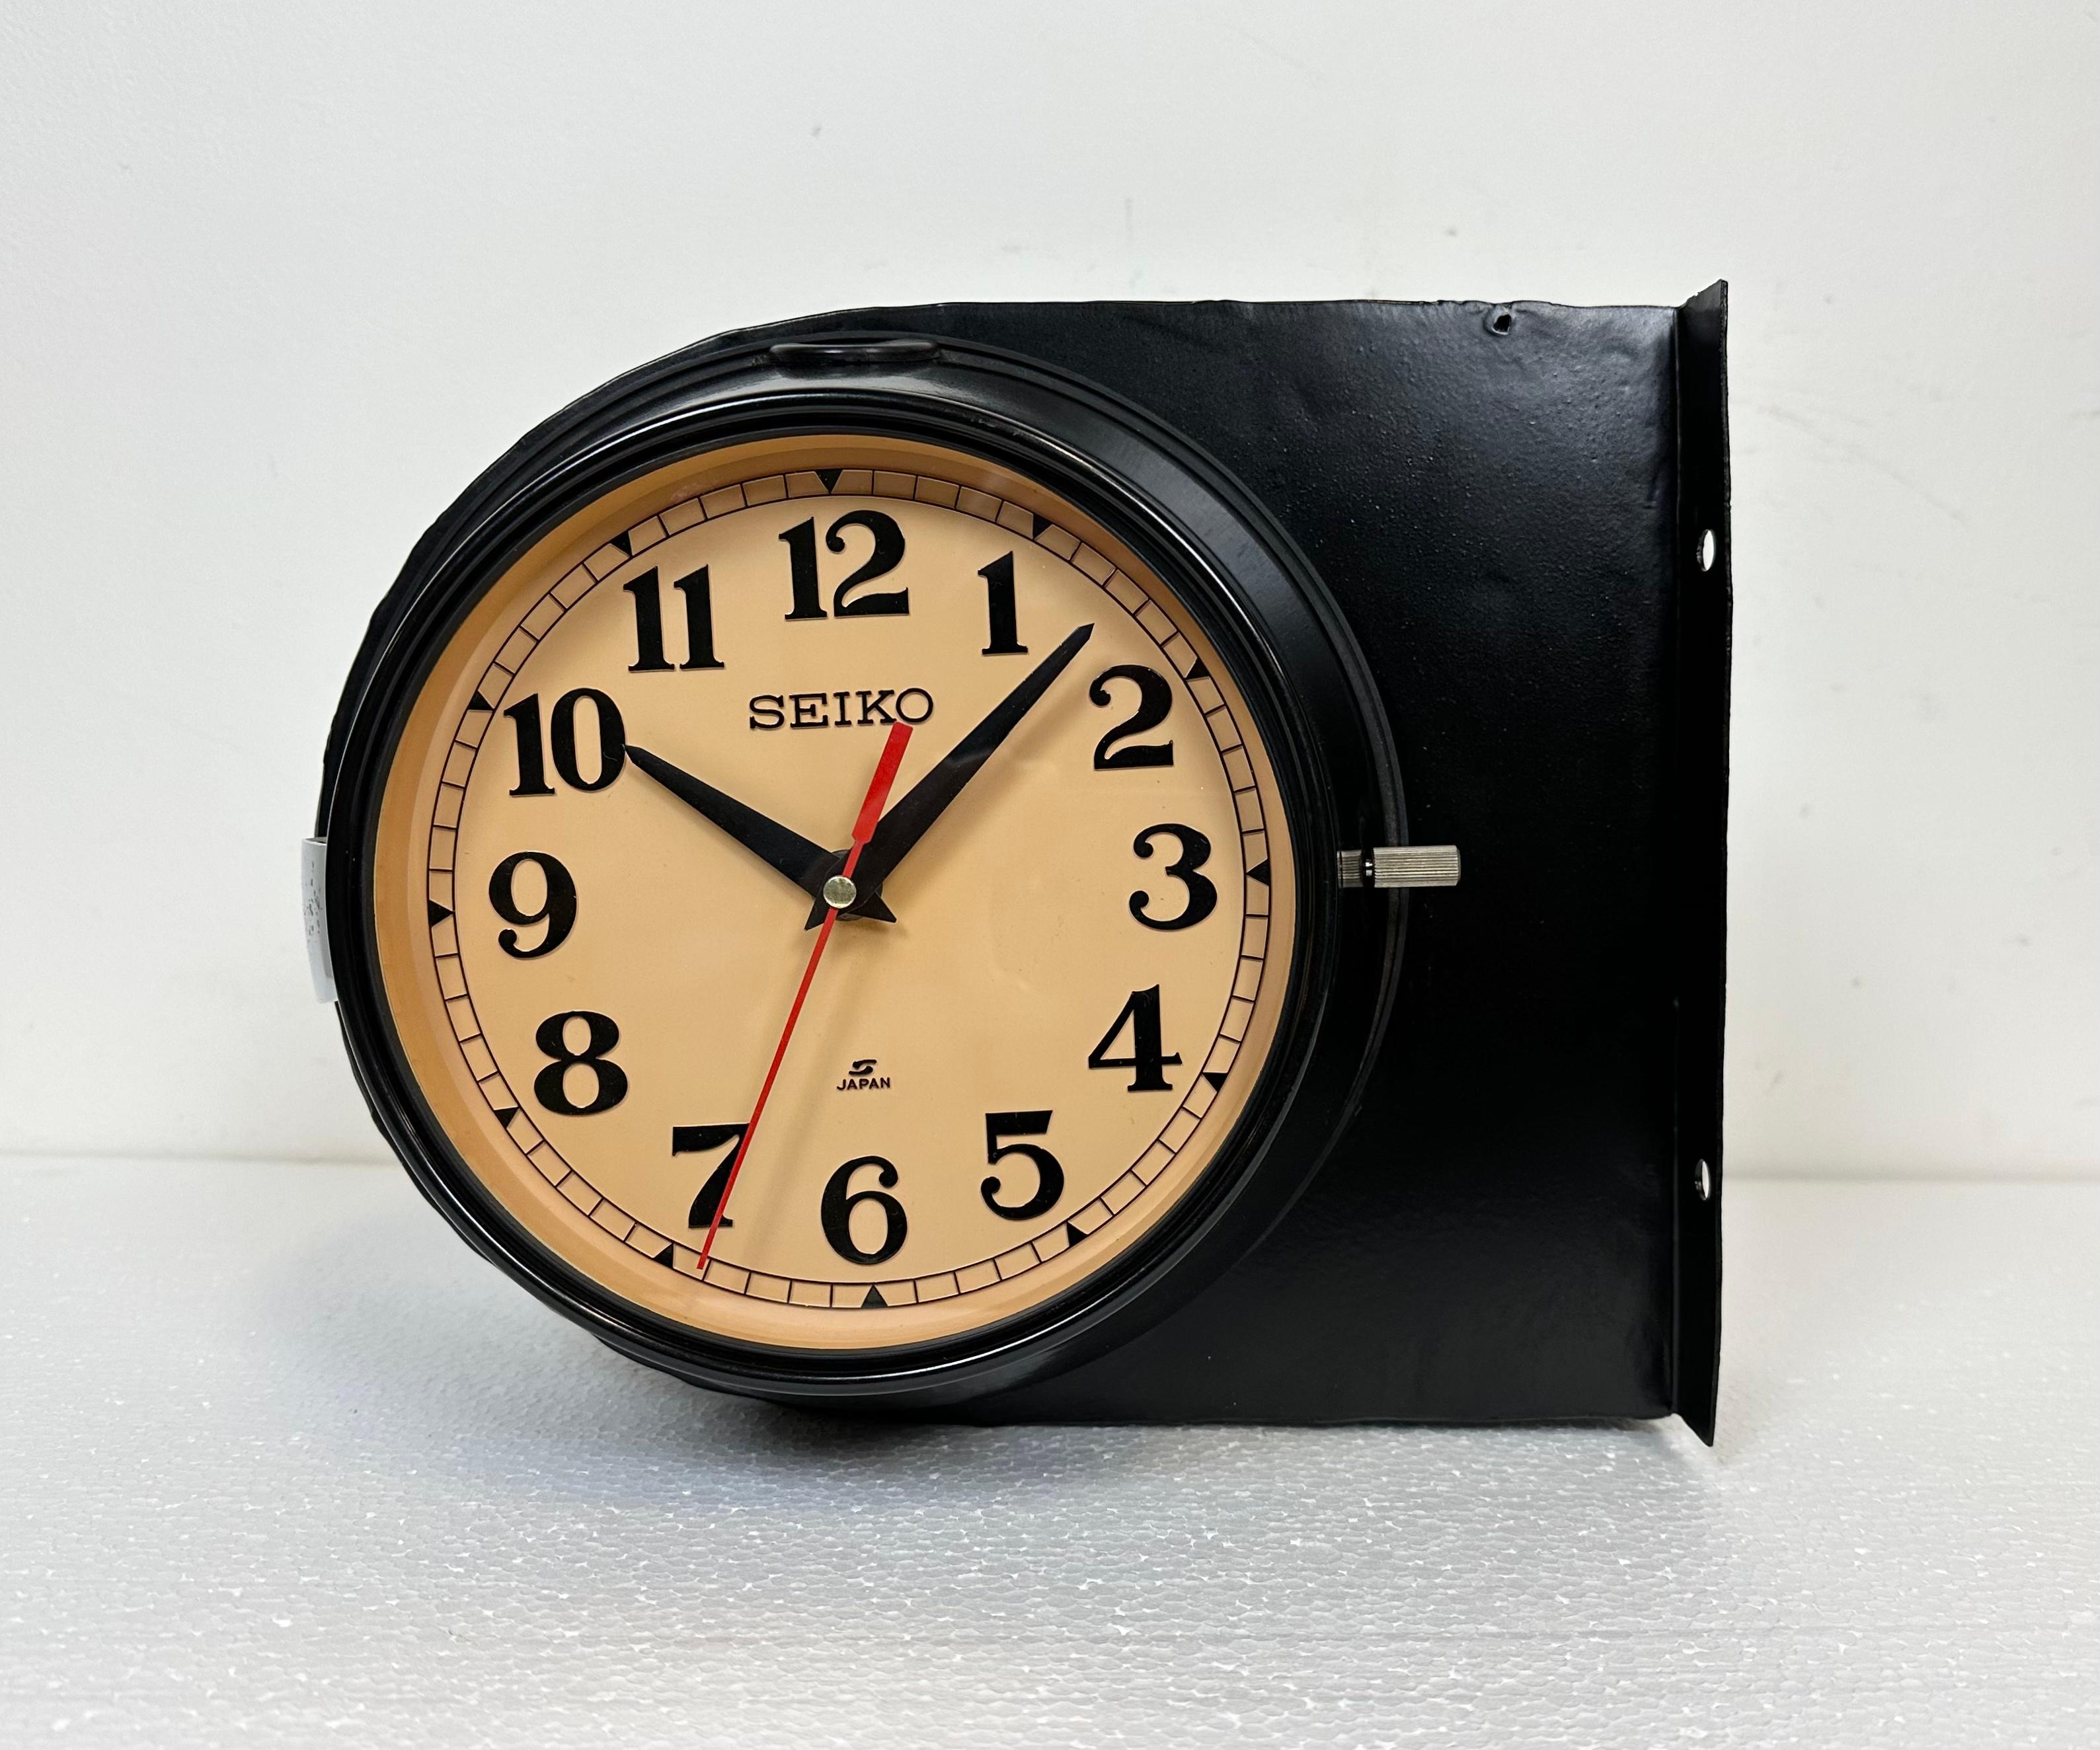 Vintage Seiko navy slave clock designed during the 1980s in Japan. These clocks were used on large Japanese tankers and cargo ships. It features a black metal body, a plastic dials and clear glass covers. This item has been converted into a